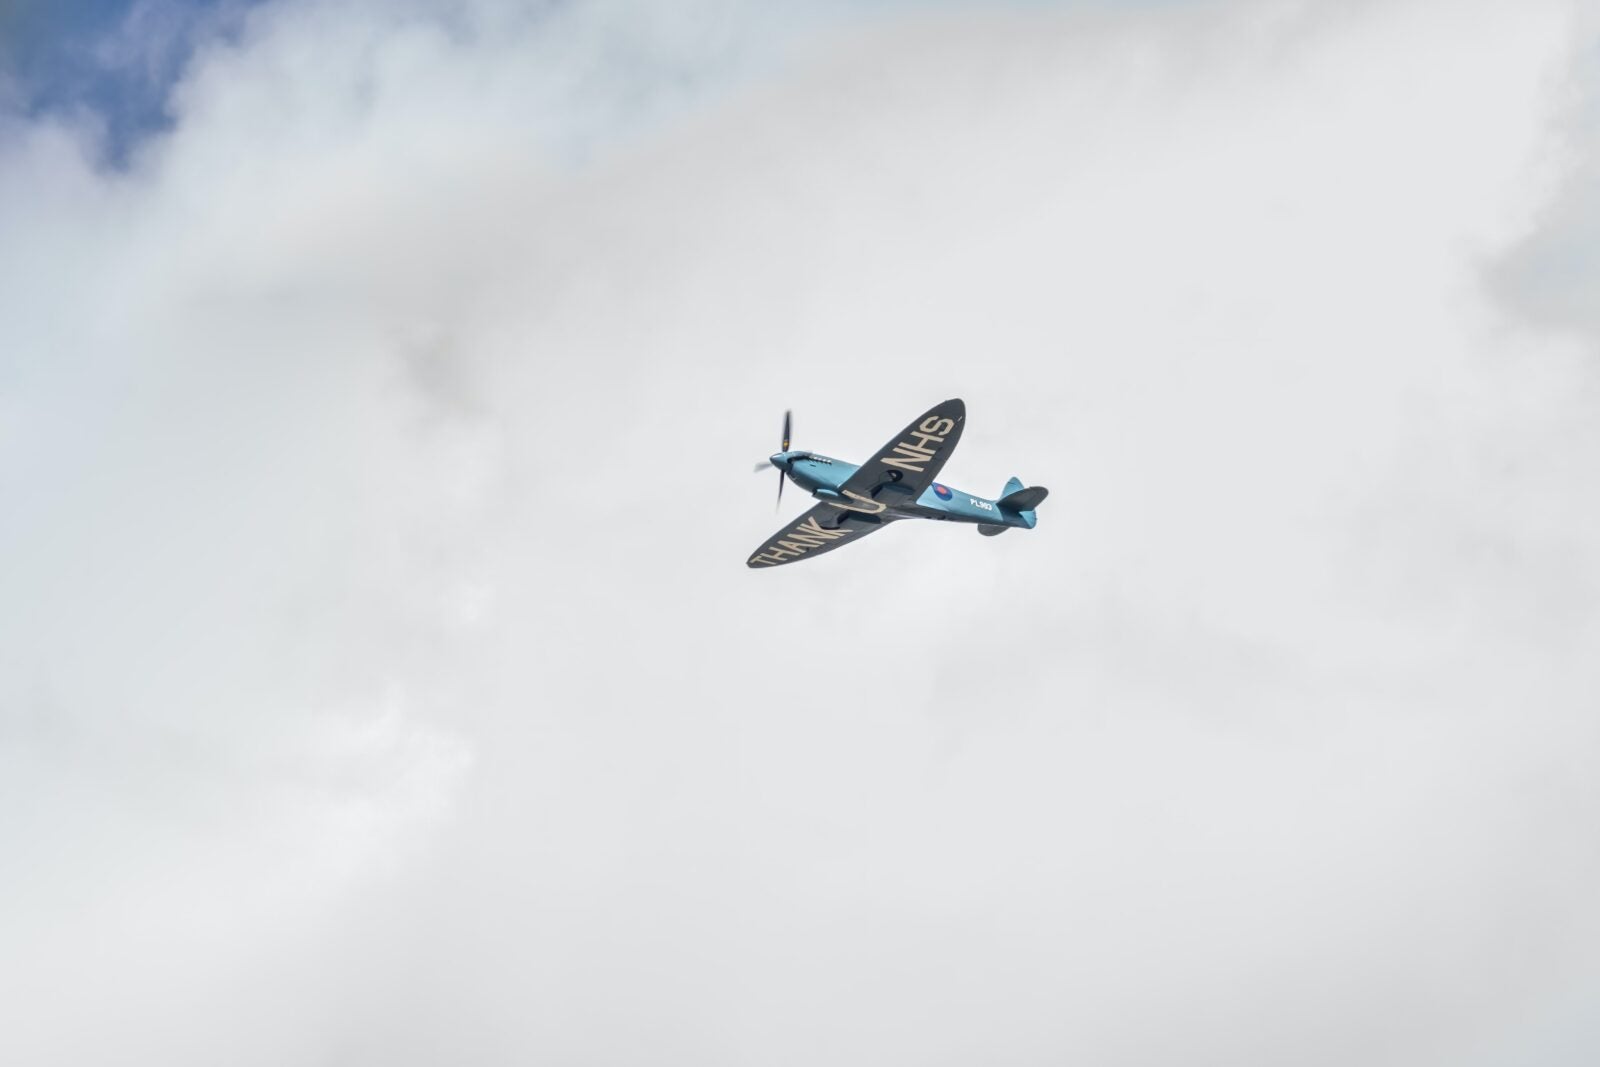 On August 1st, a Spitfire with "Thank You NHS" flew past a series of hospitals here in the South East of England. I only found out minutes before it flew over my garden, and I was able to get a couple of shots showing the message.